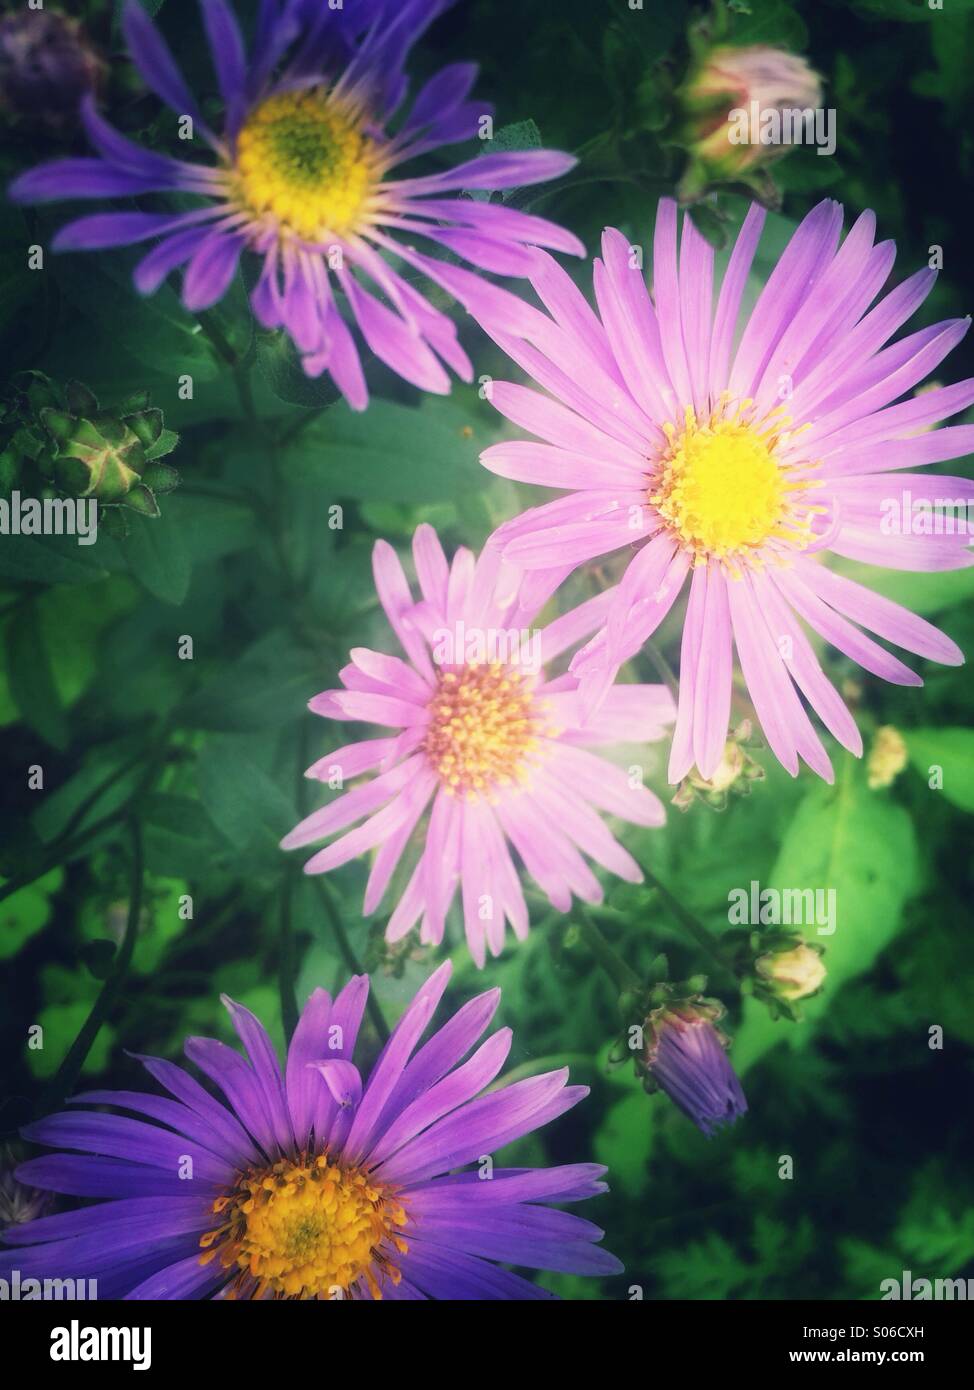 Violet purple aster flowers Stock Photo